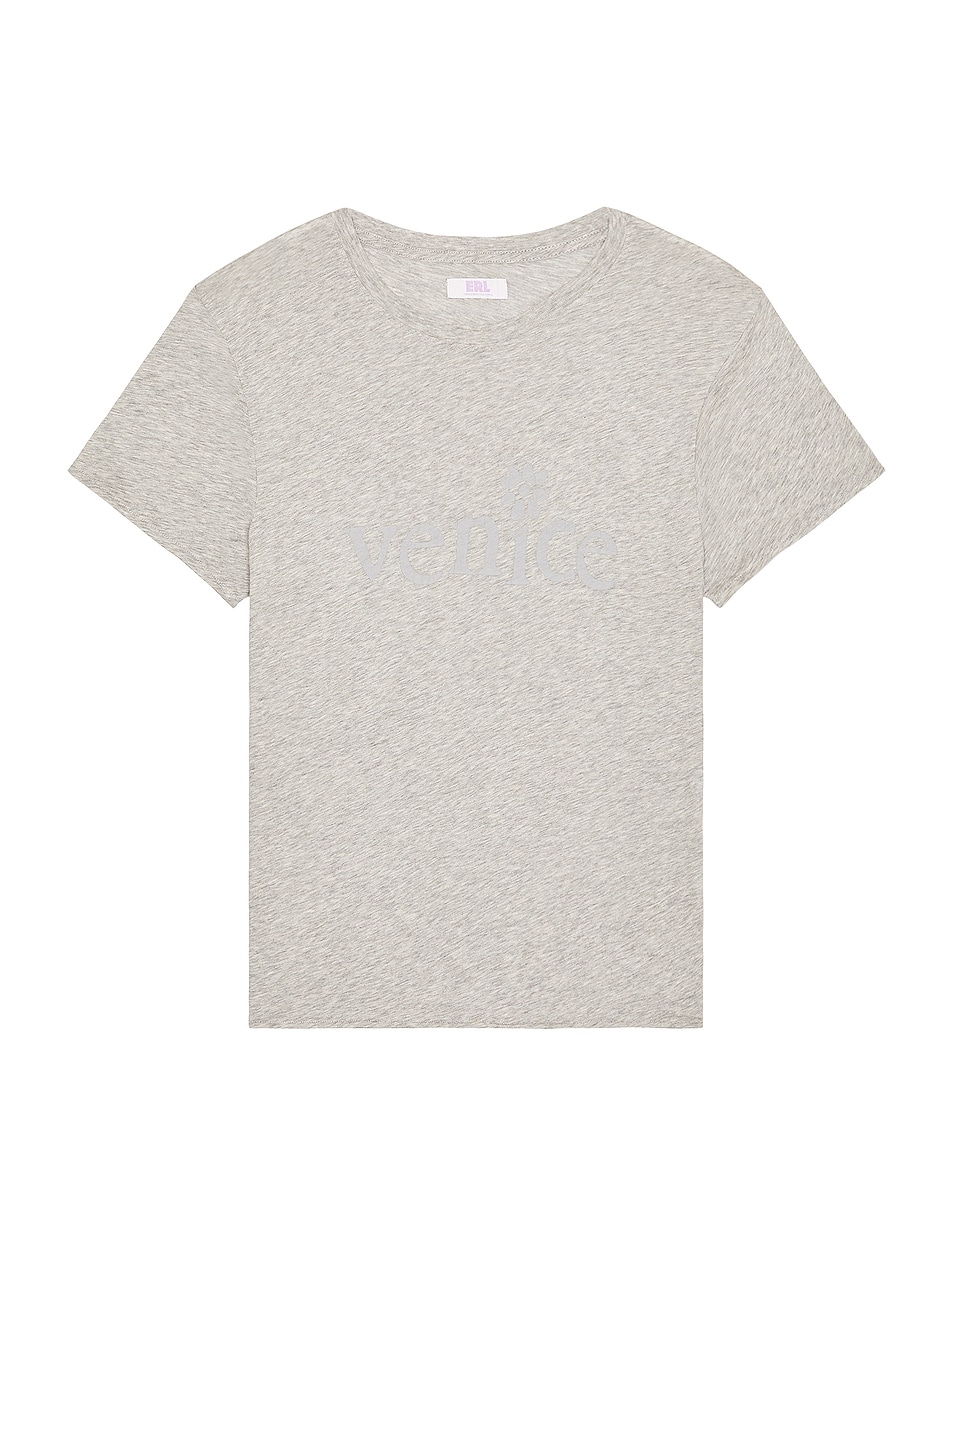 Image 1 of ERL Venice T-Shirt in Grey